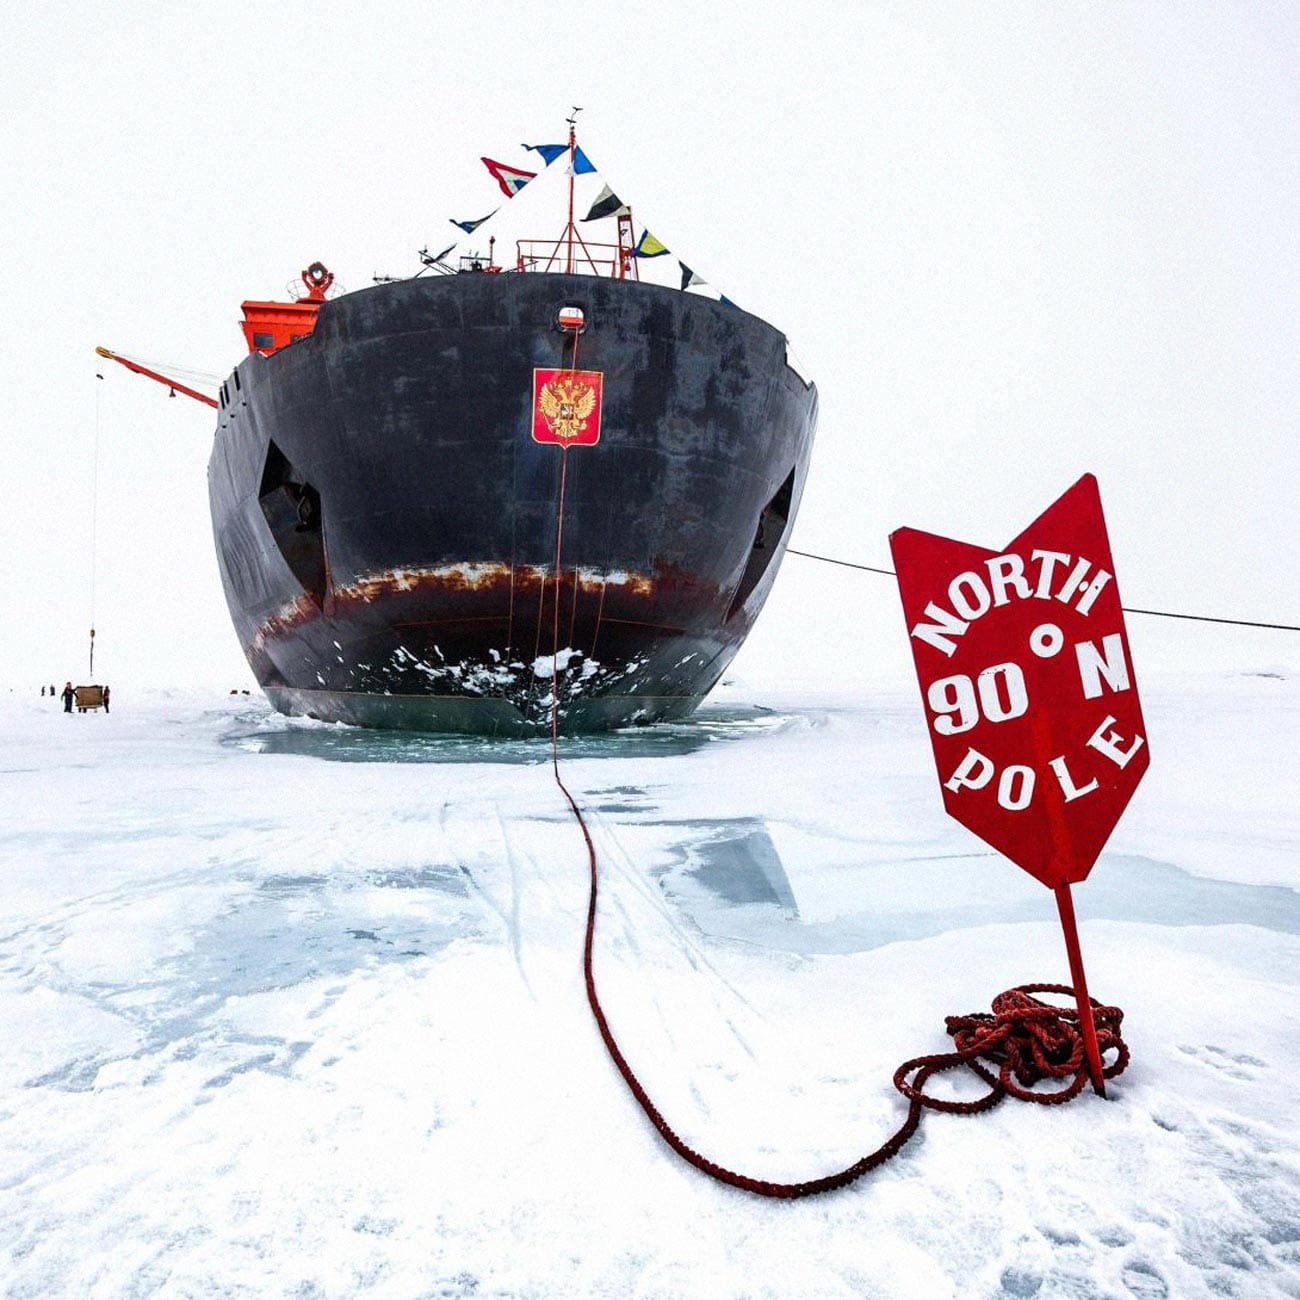 50 Years of Victory icebreaker at the North Pole